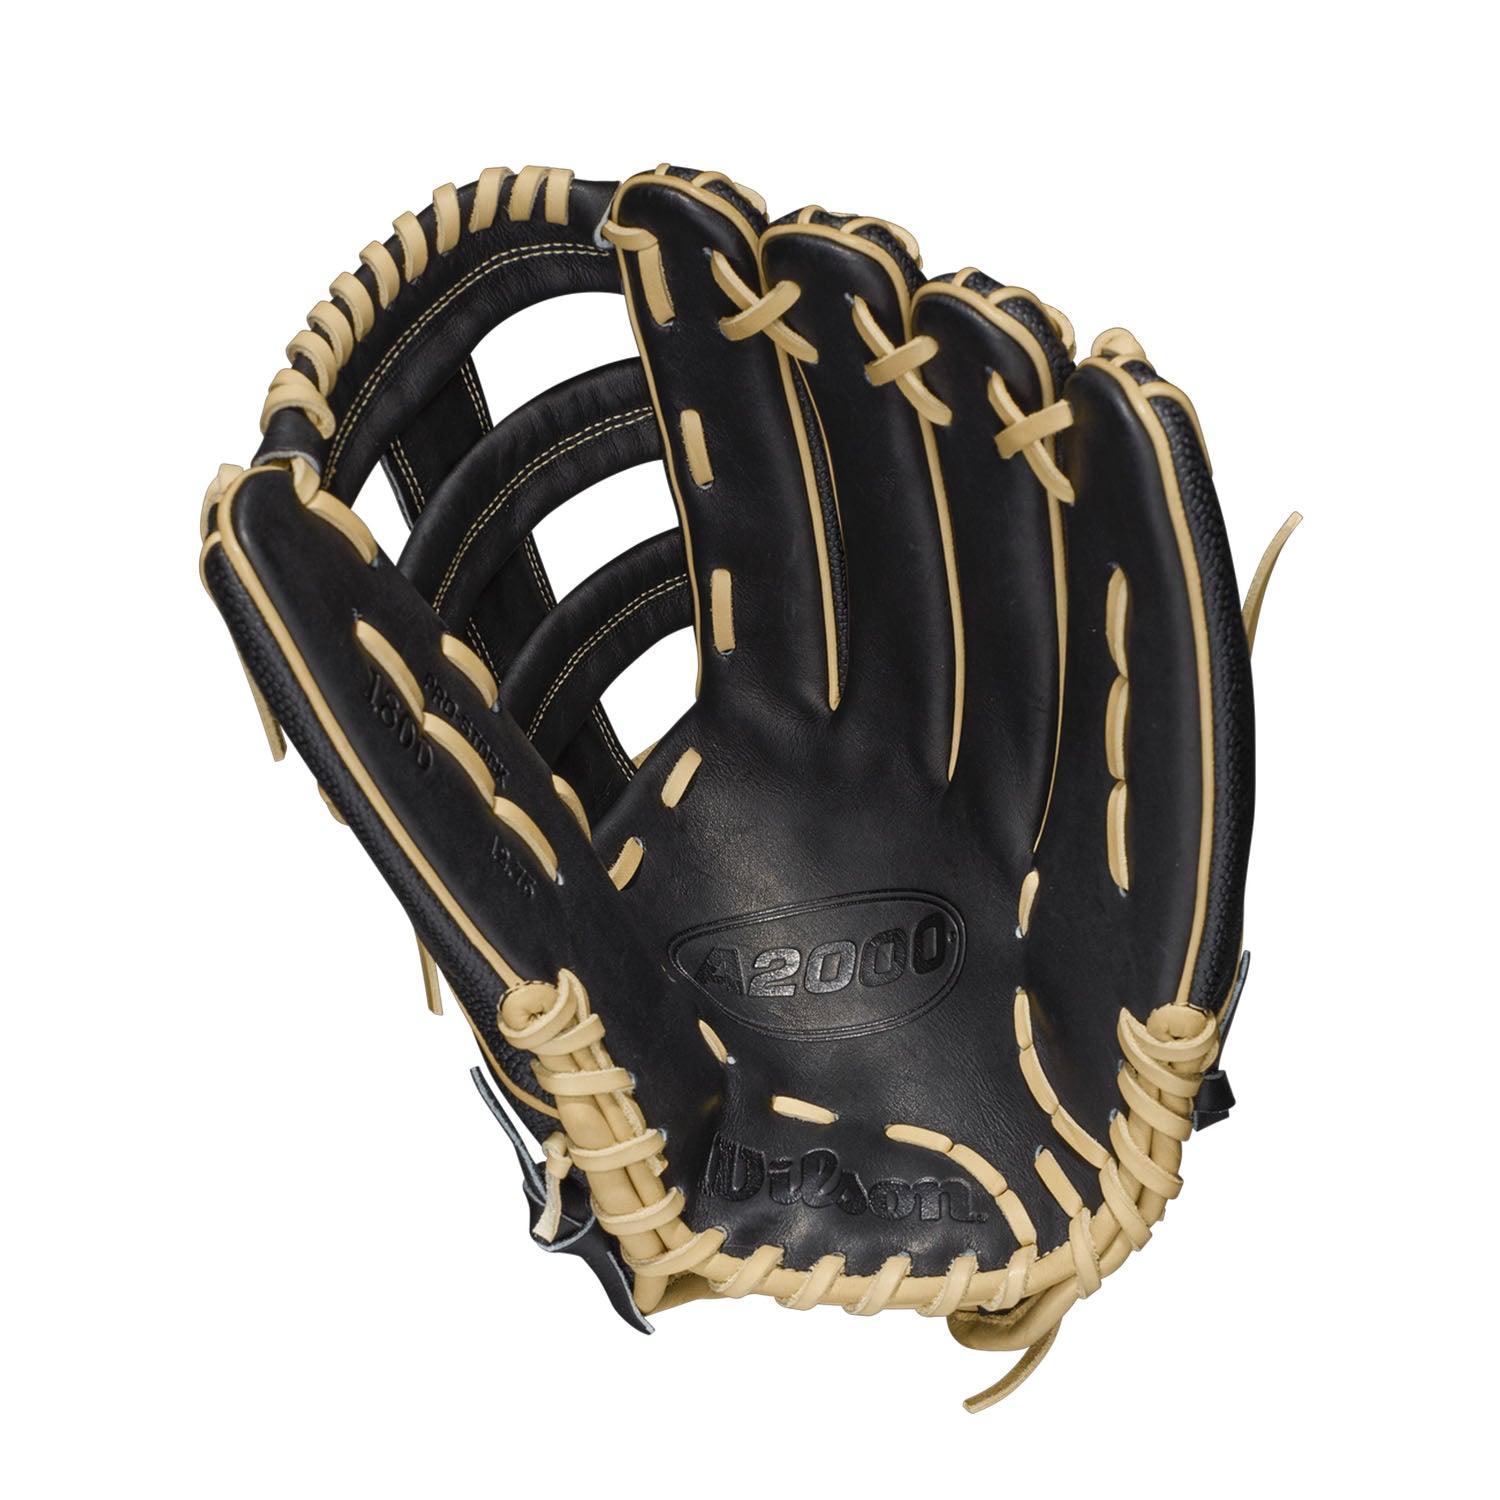 A2000 1800SS 12.75" Outfield Baseball Glove - Sports Excellence